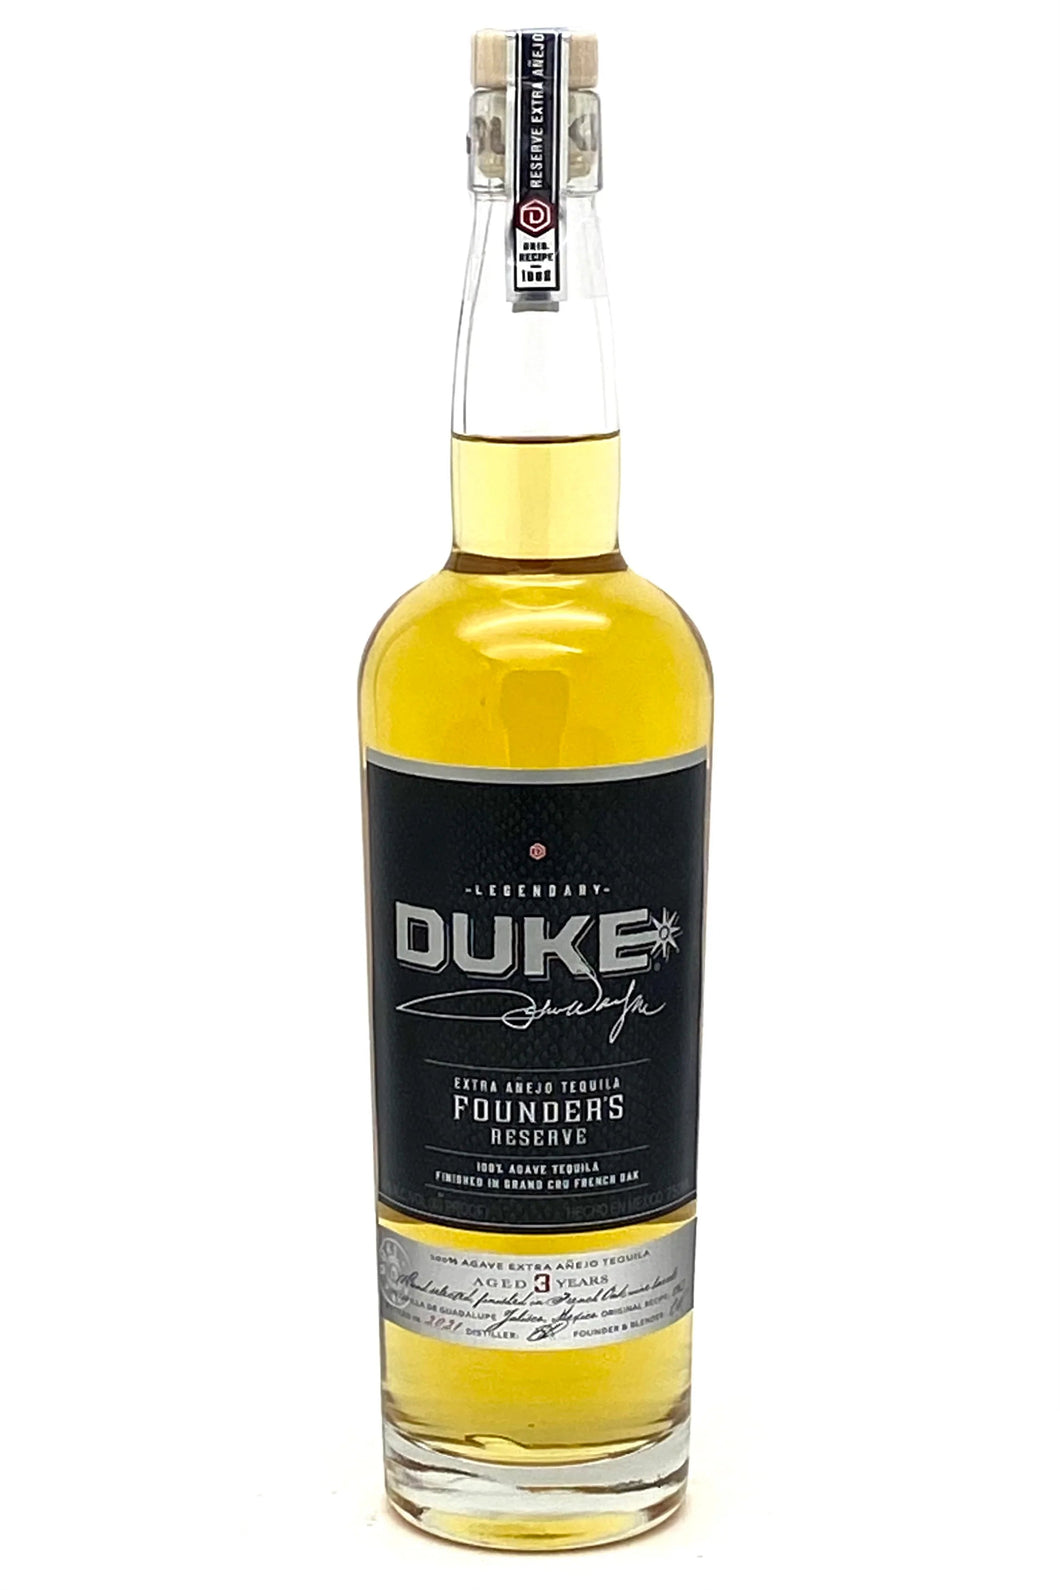 Duke Extra Anejo Founders Reserve 3 Year Tequila